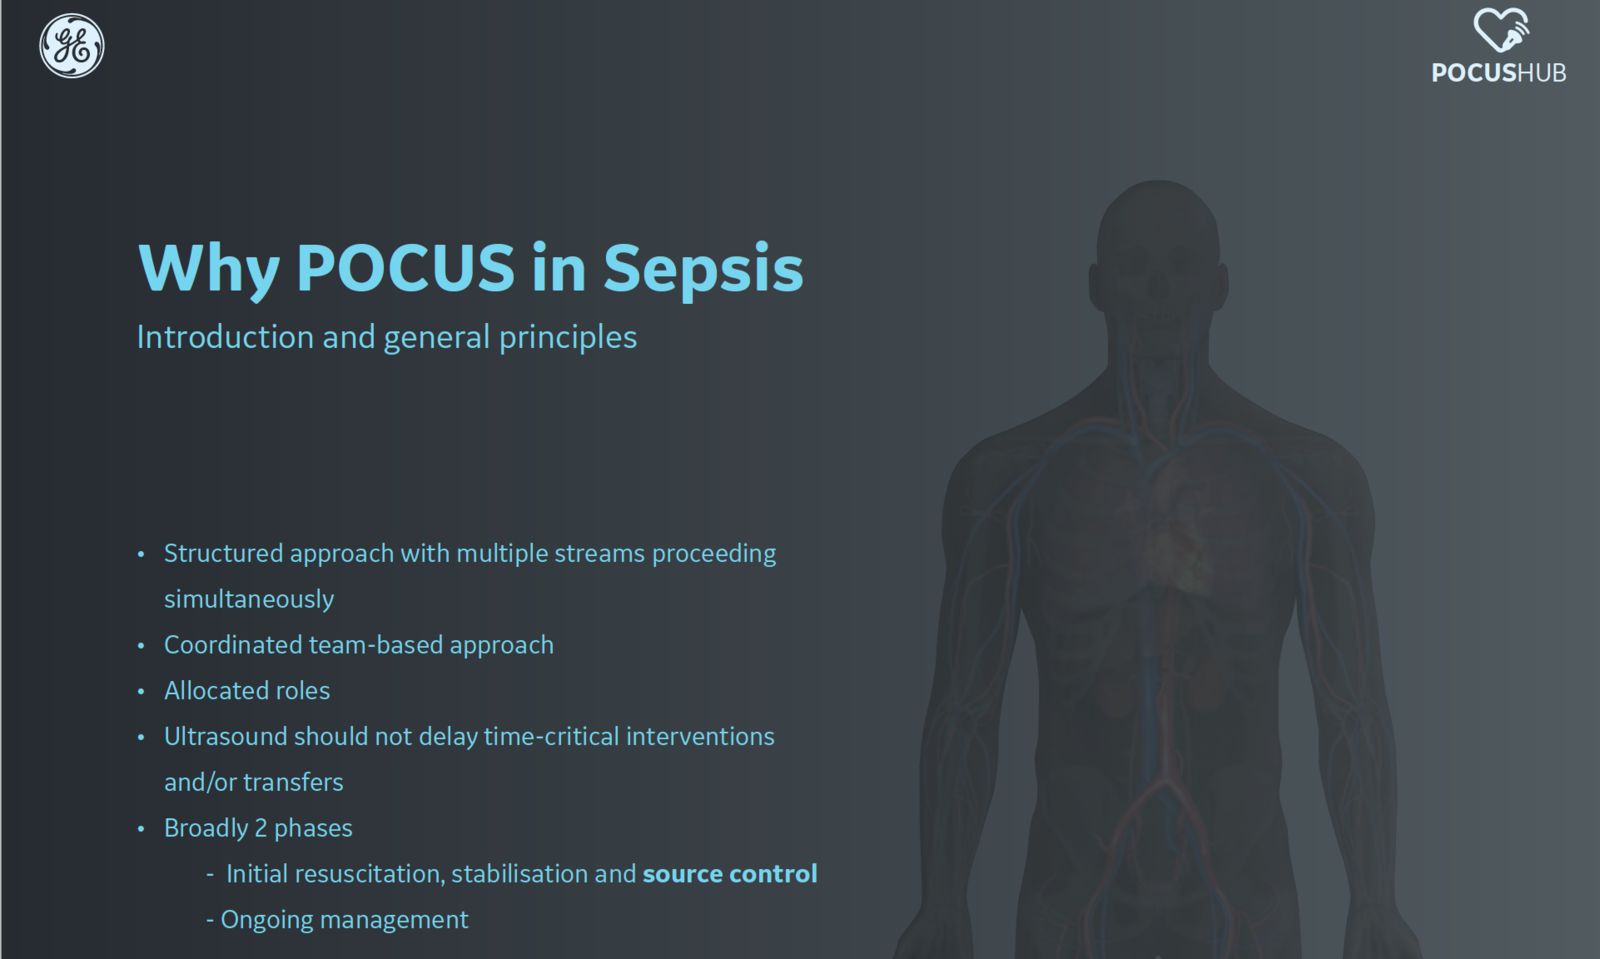 Why Pocus in Sepsis